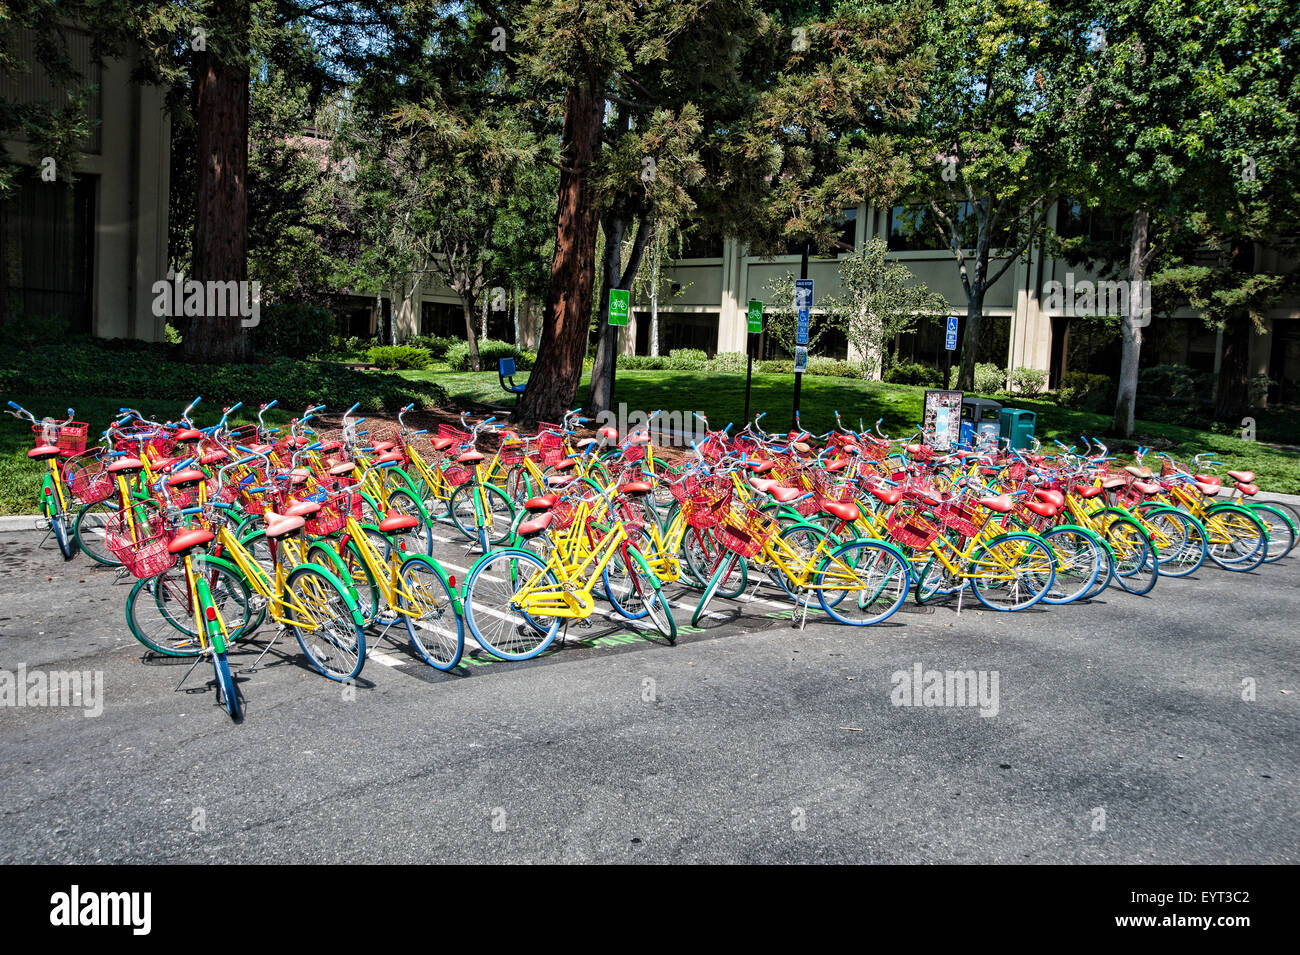 MOUNTAIN VIEW, CA - AUGUST 1, 2015: Bikes used by Google employees to navigate Google headquarters, also known as Googleplex, in Stock Photo